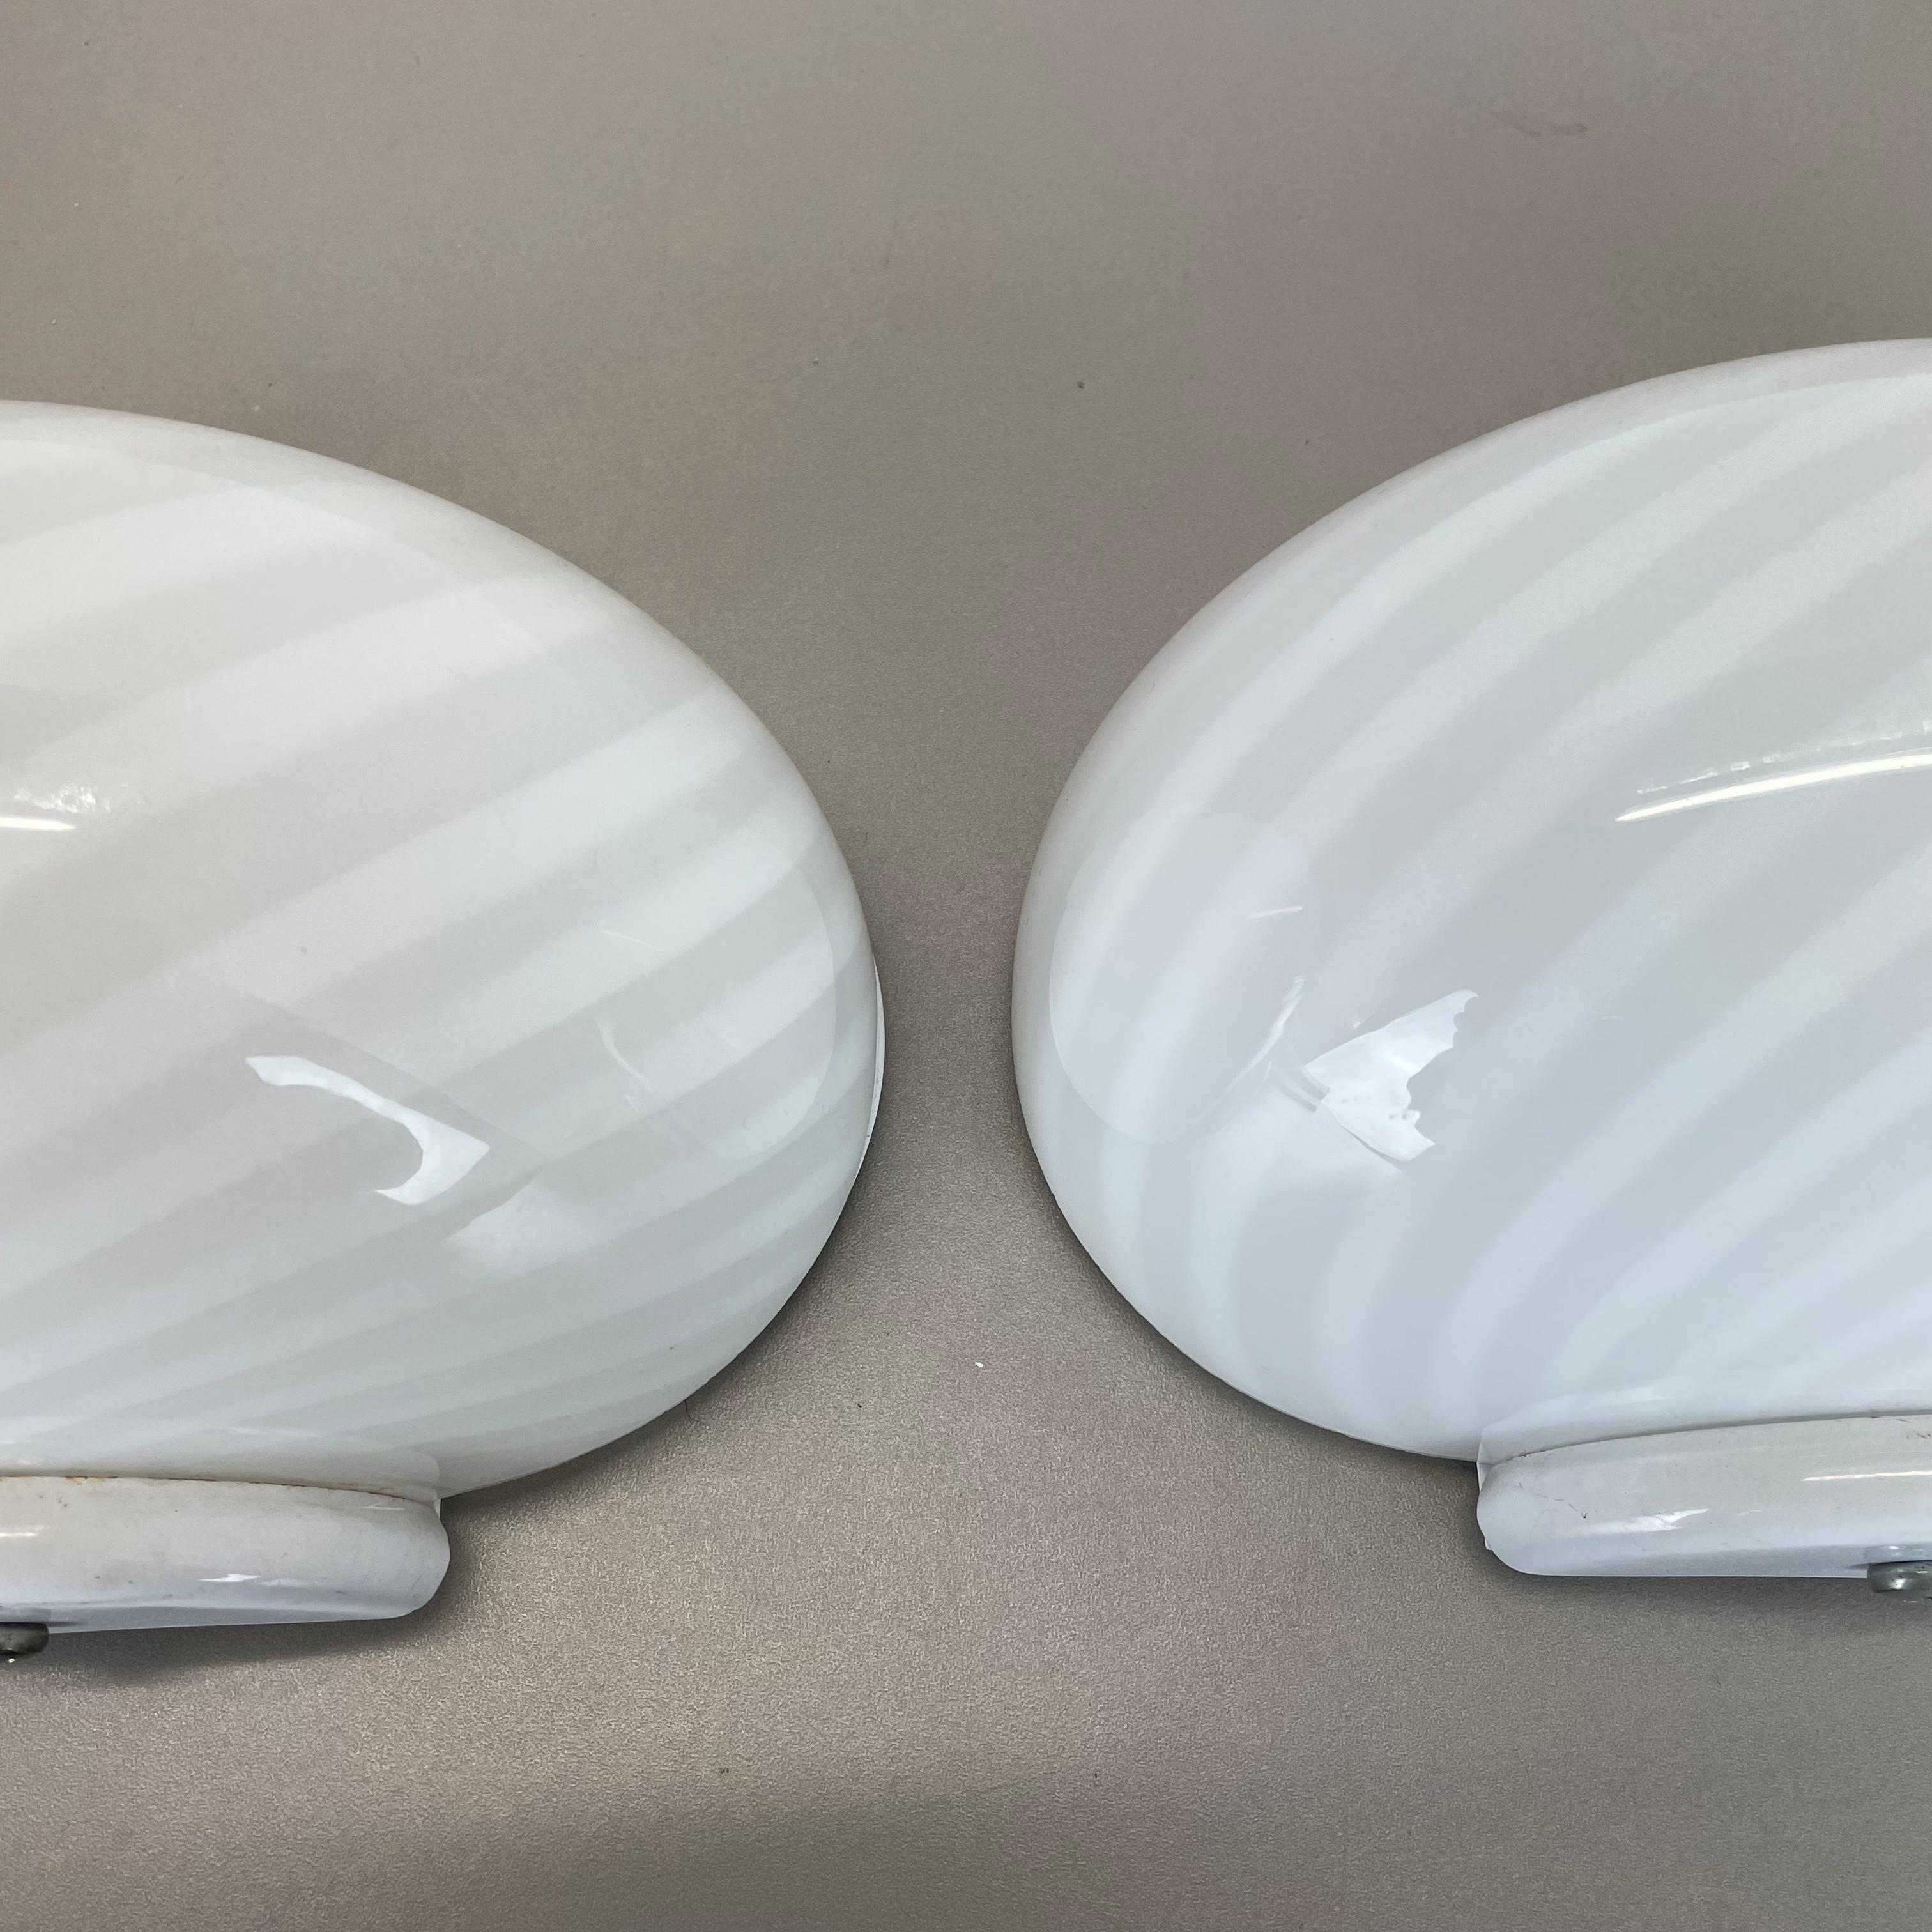 Set of Two Murano Swirl Glass Wall Light Sconces Vetri Murano, Italy, 1980s For Sale 7